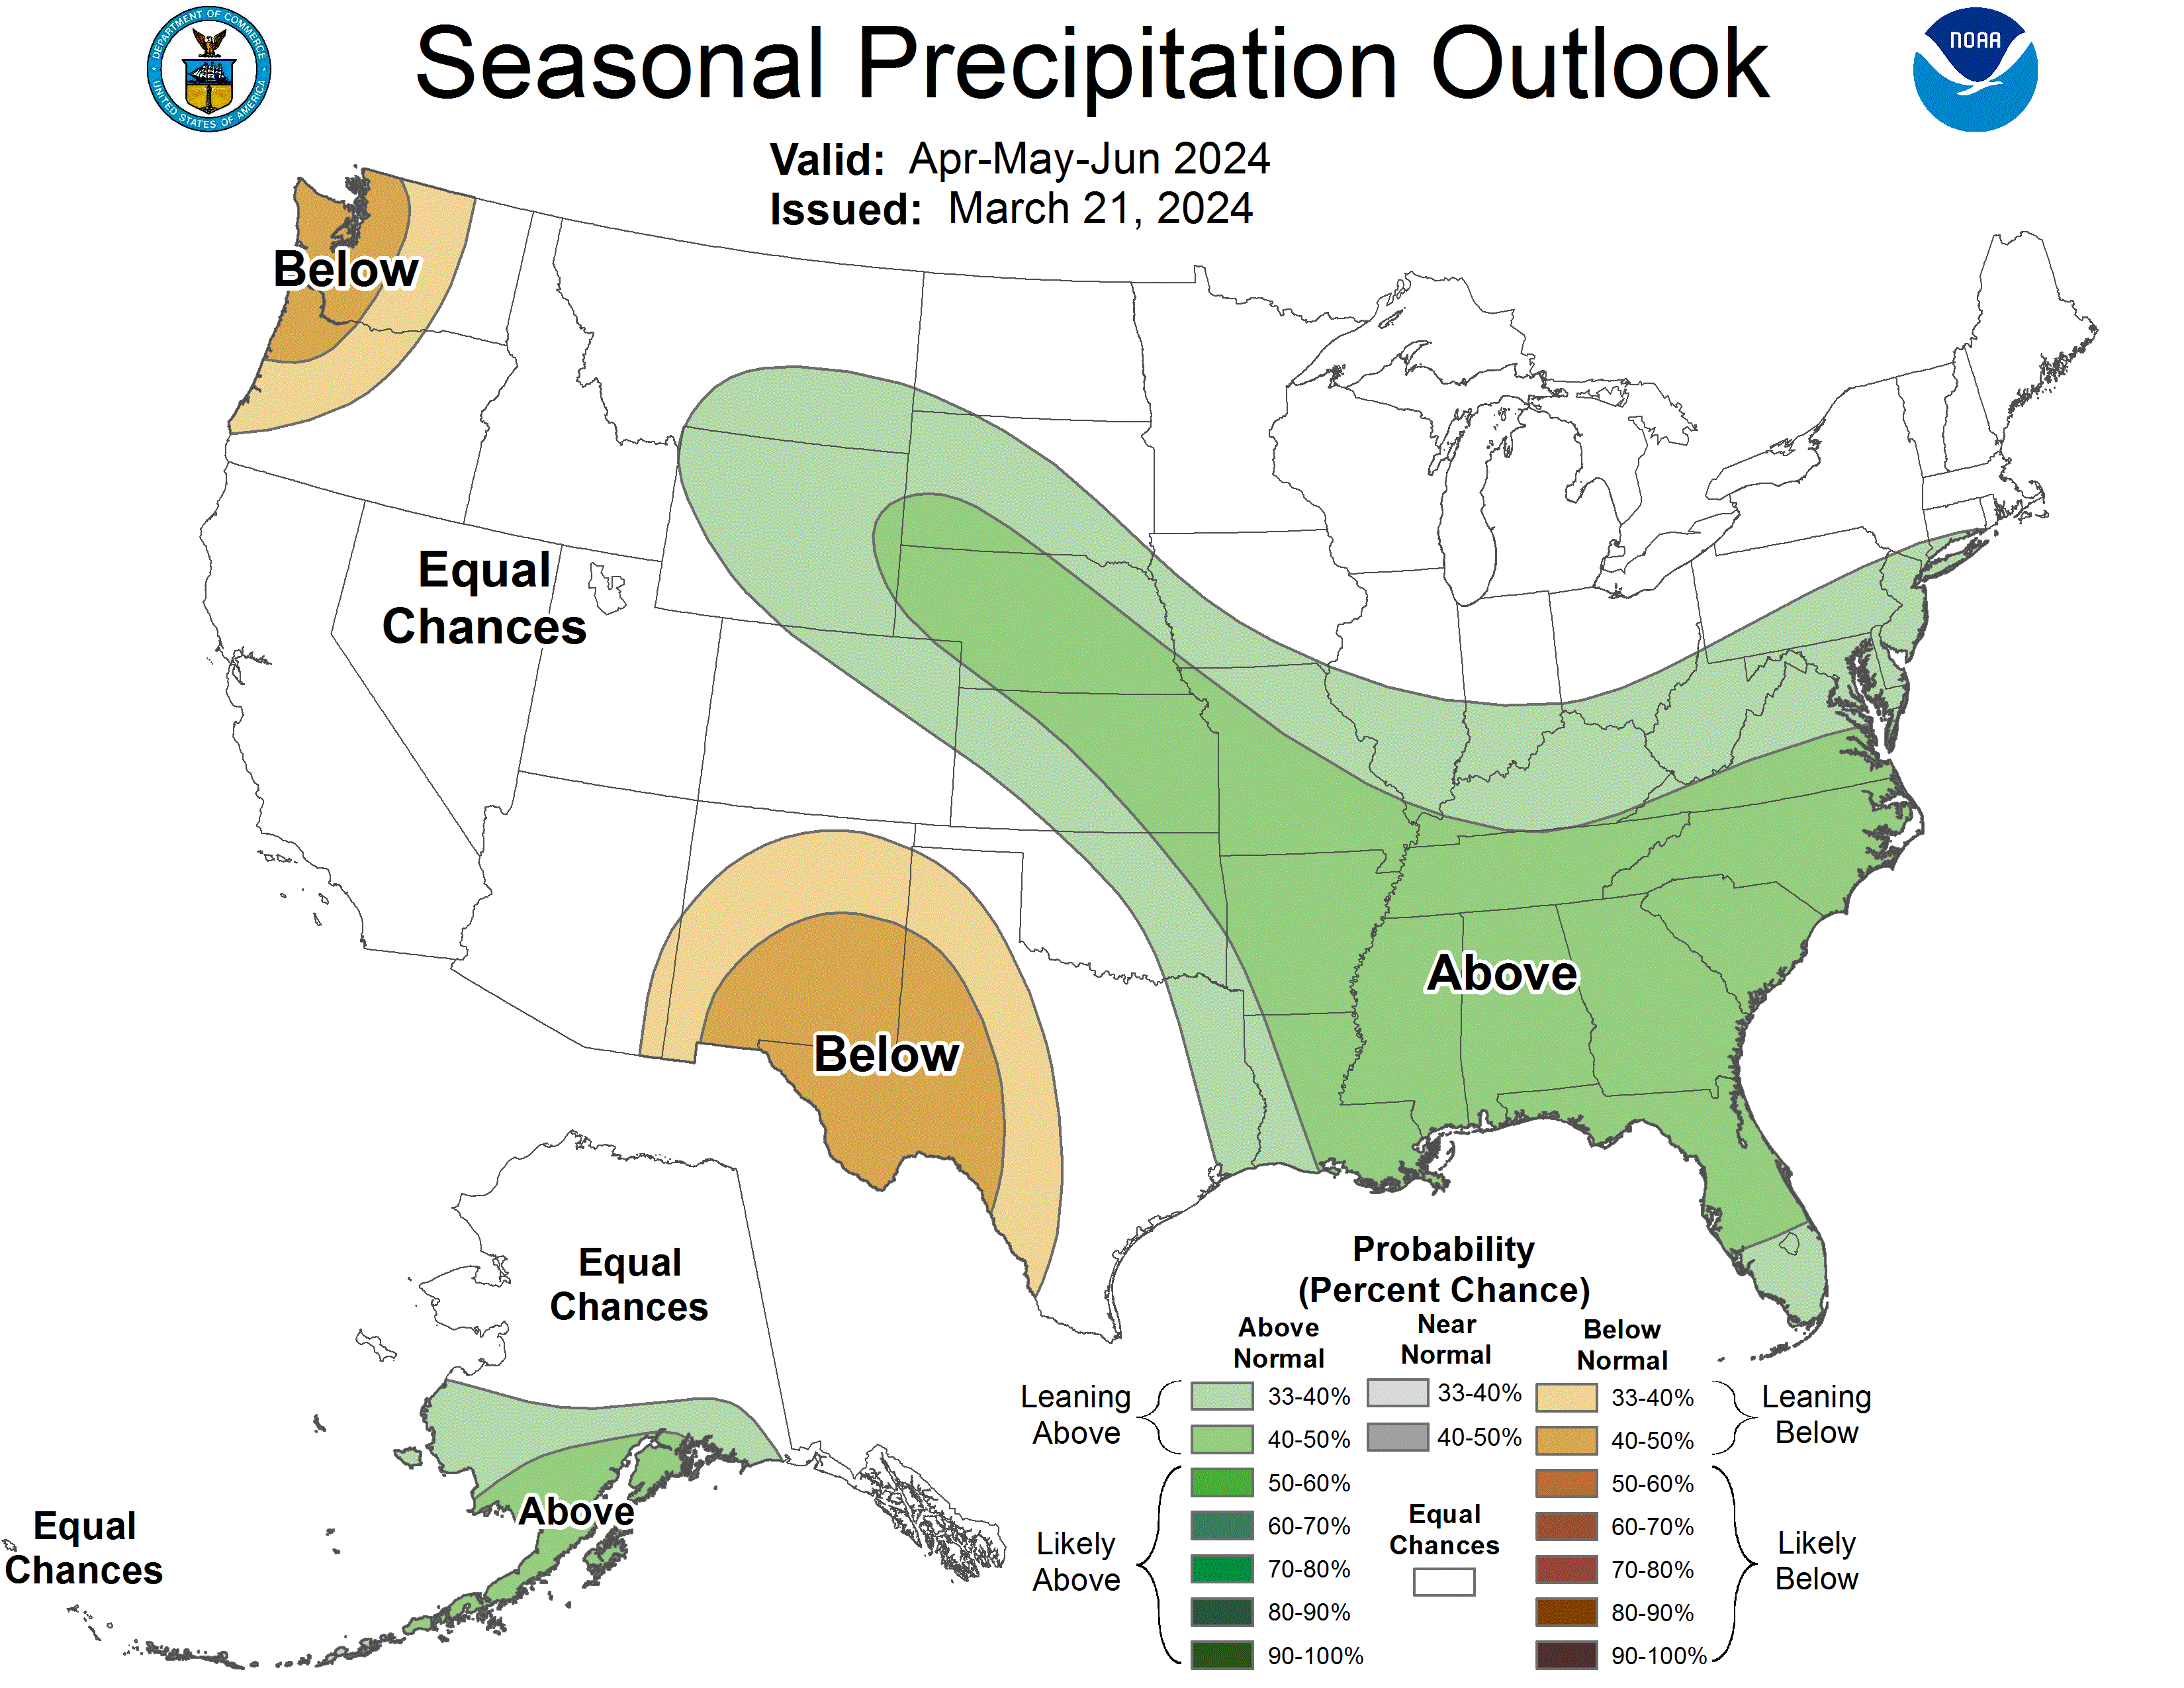 Map of the United States depicting the Seasonal Precipitation Outlook for April-June 2024 issued on March 21, 2024. 